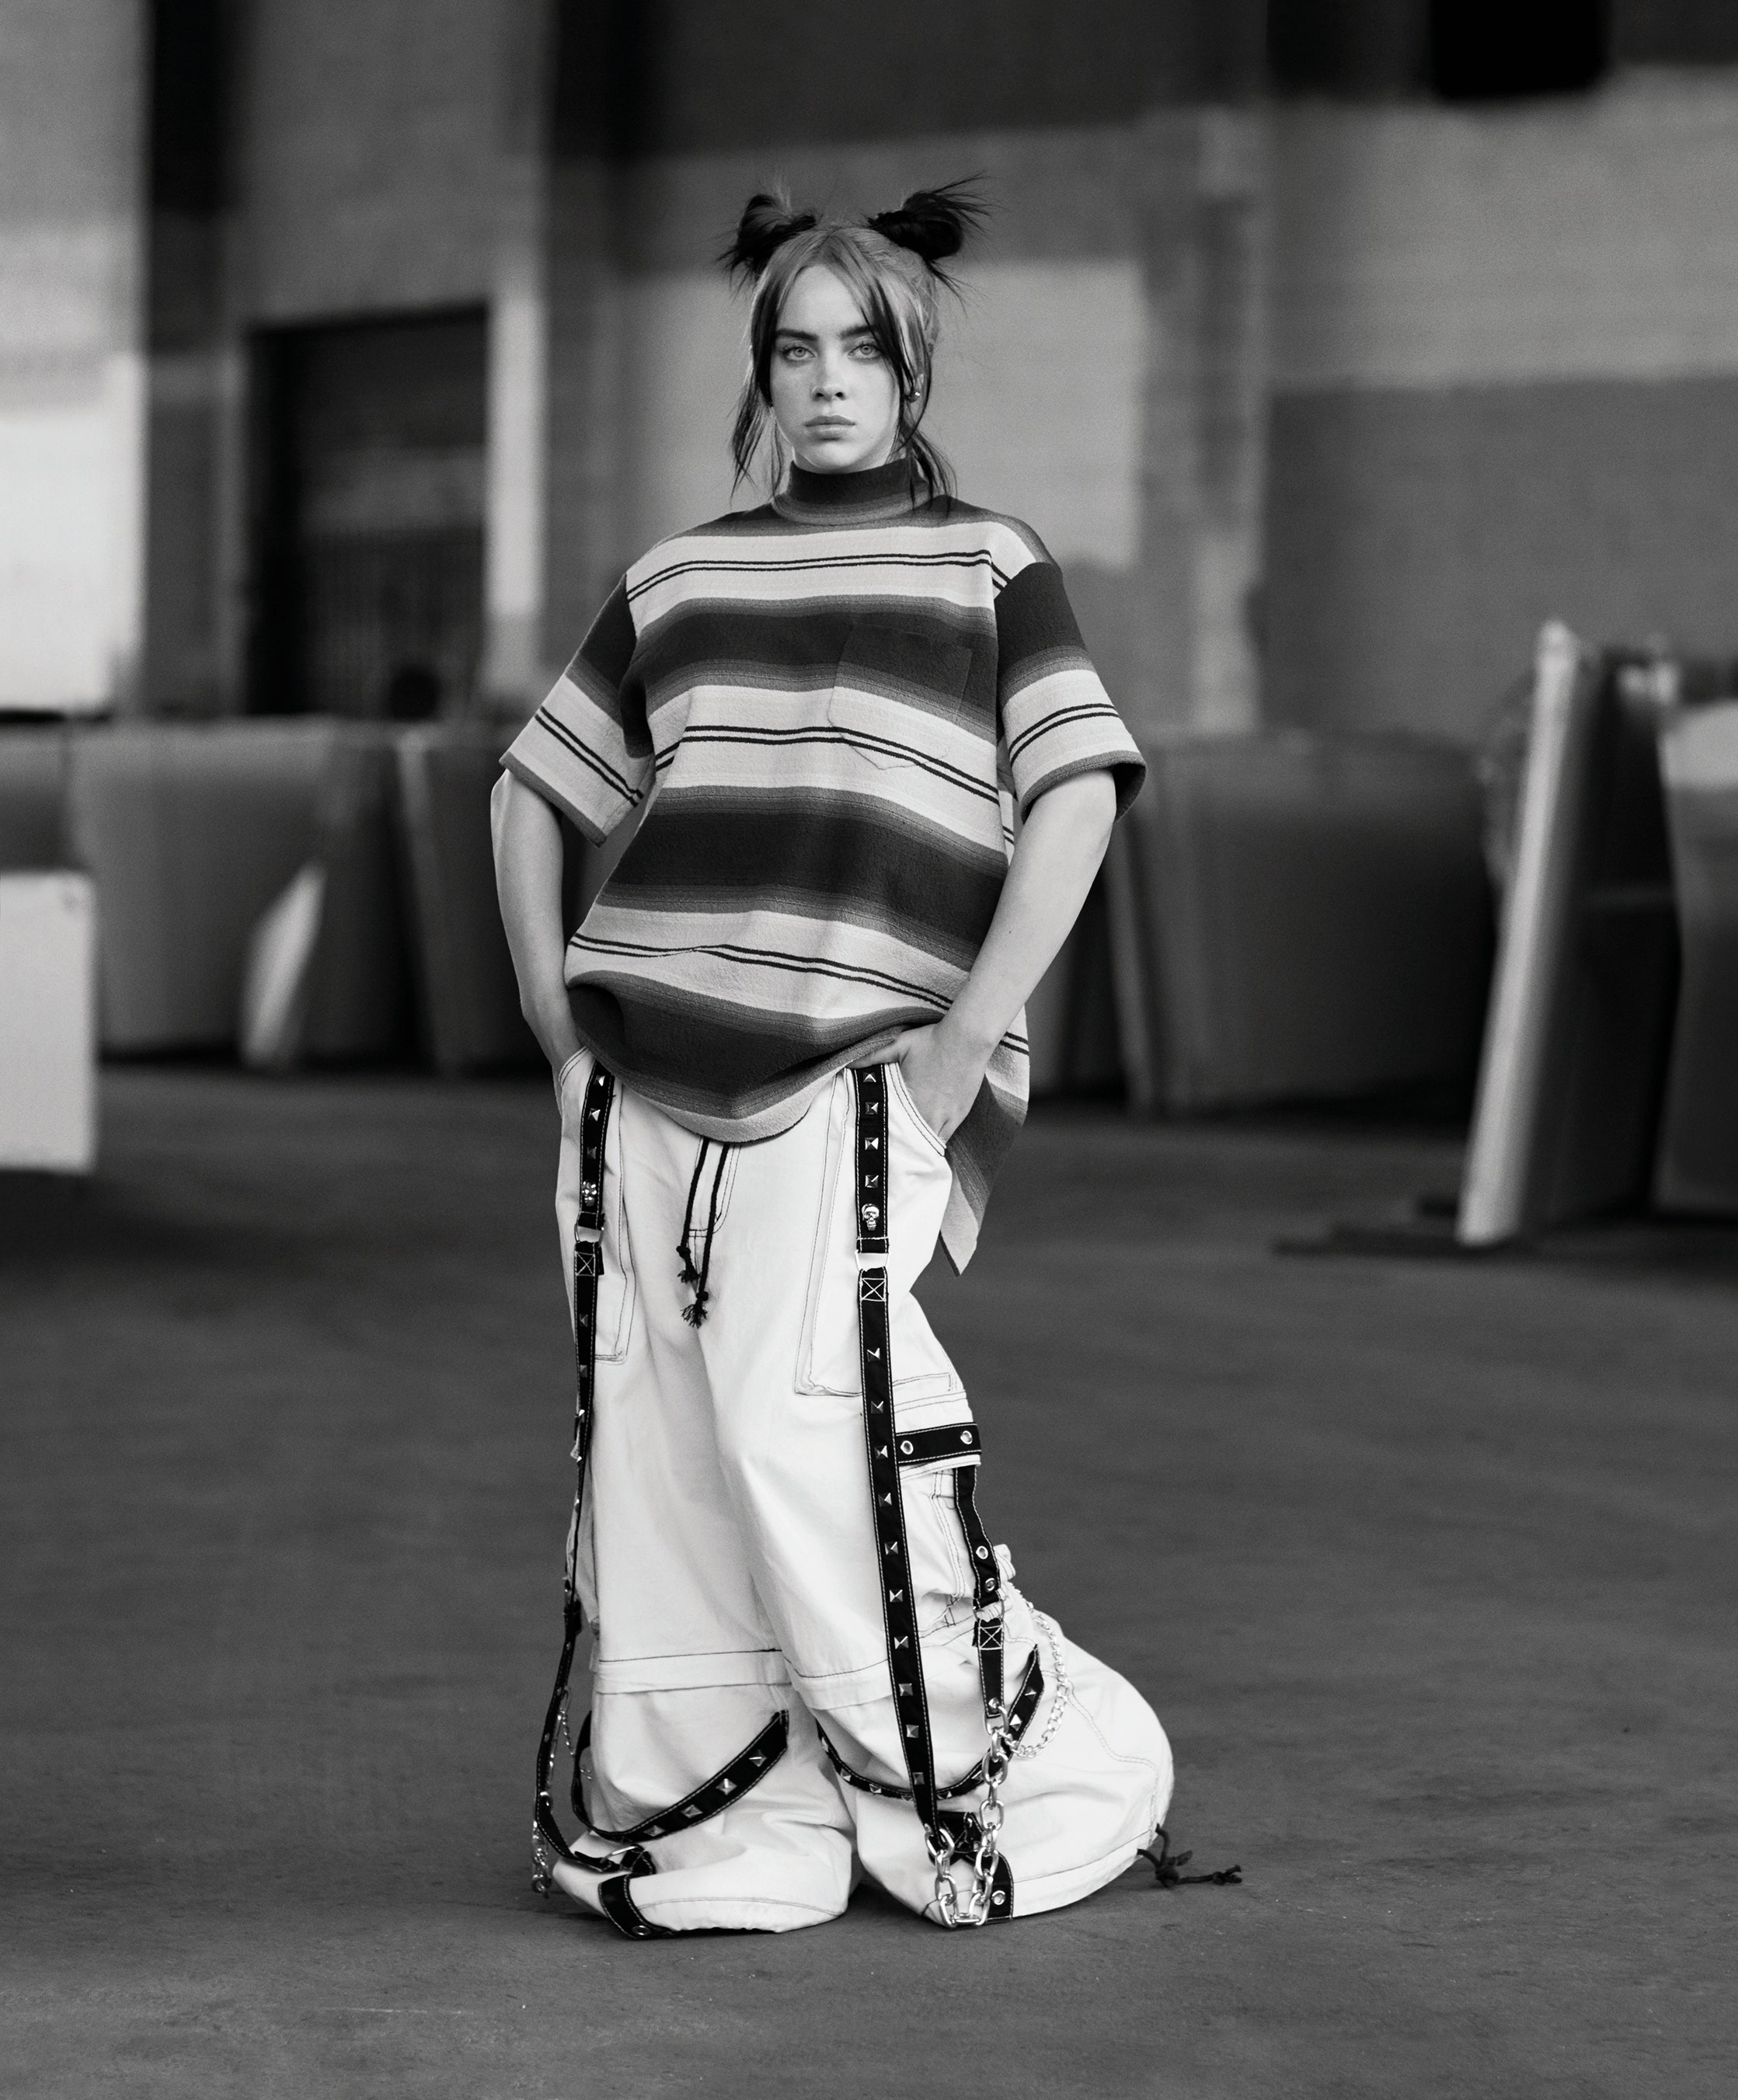 Billie Eilish Black and White 2020 Wallpapers